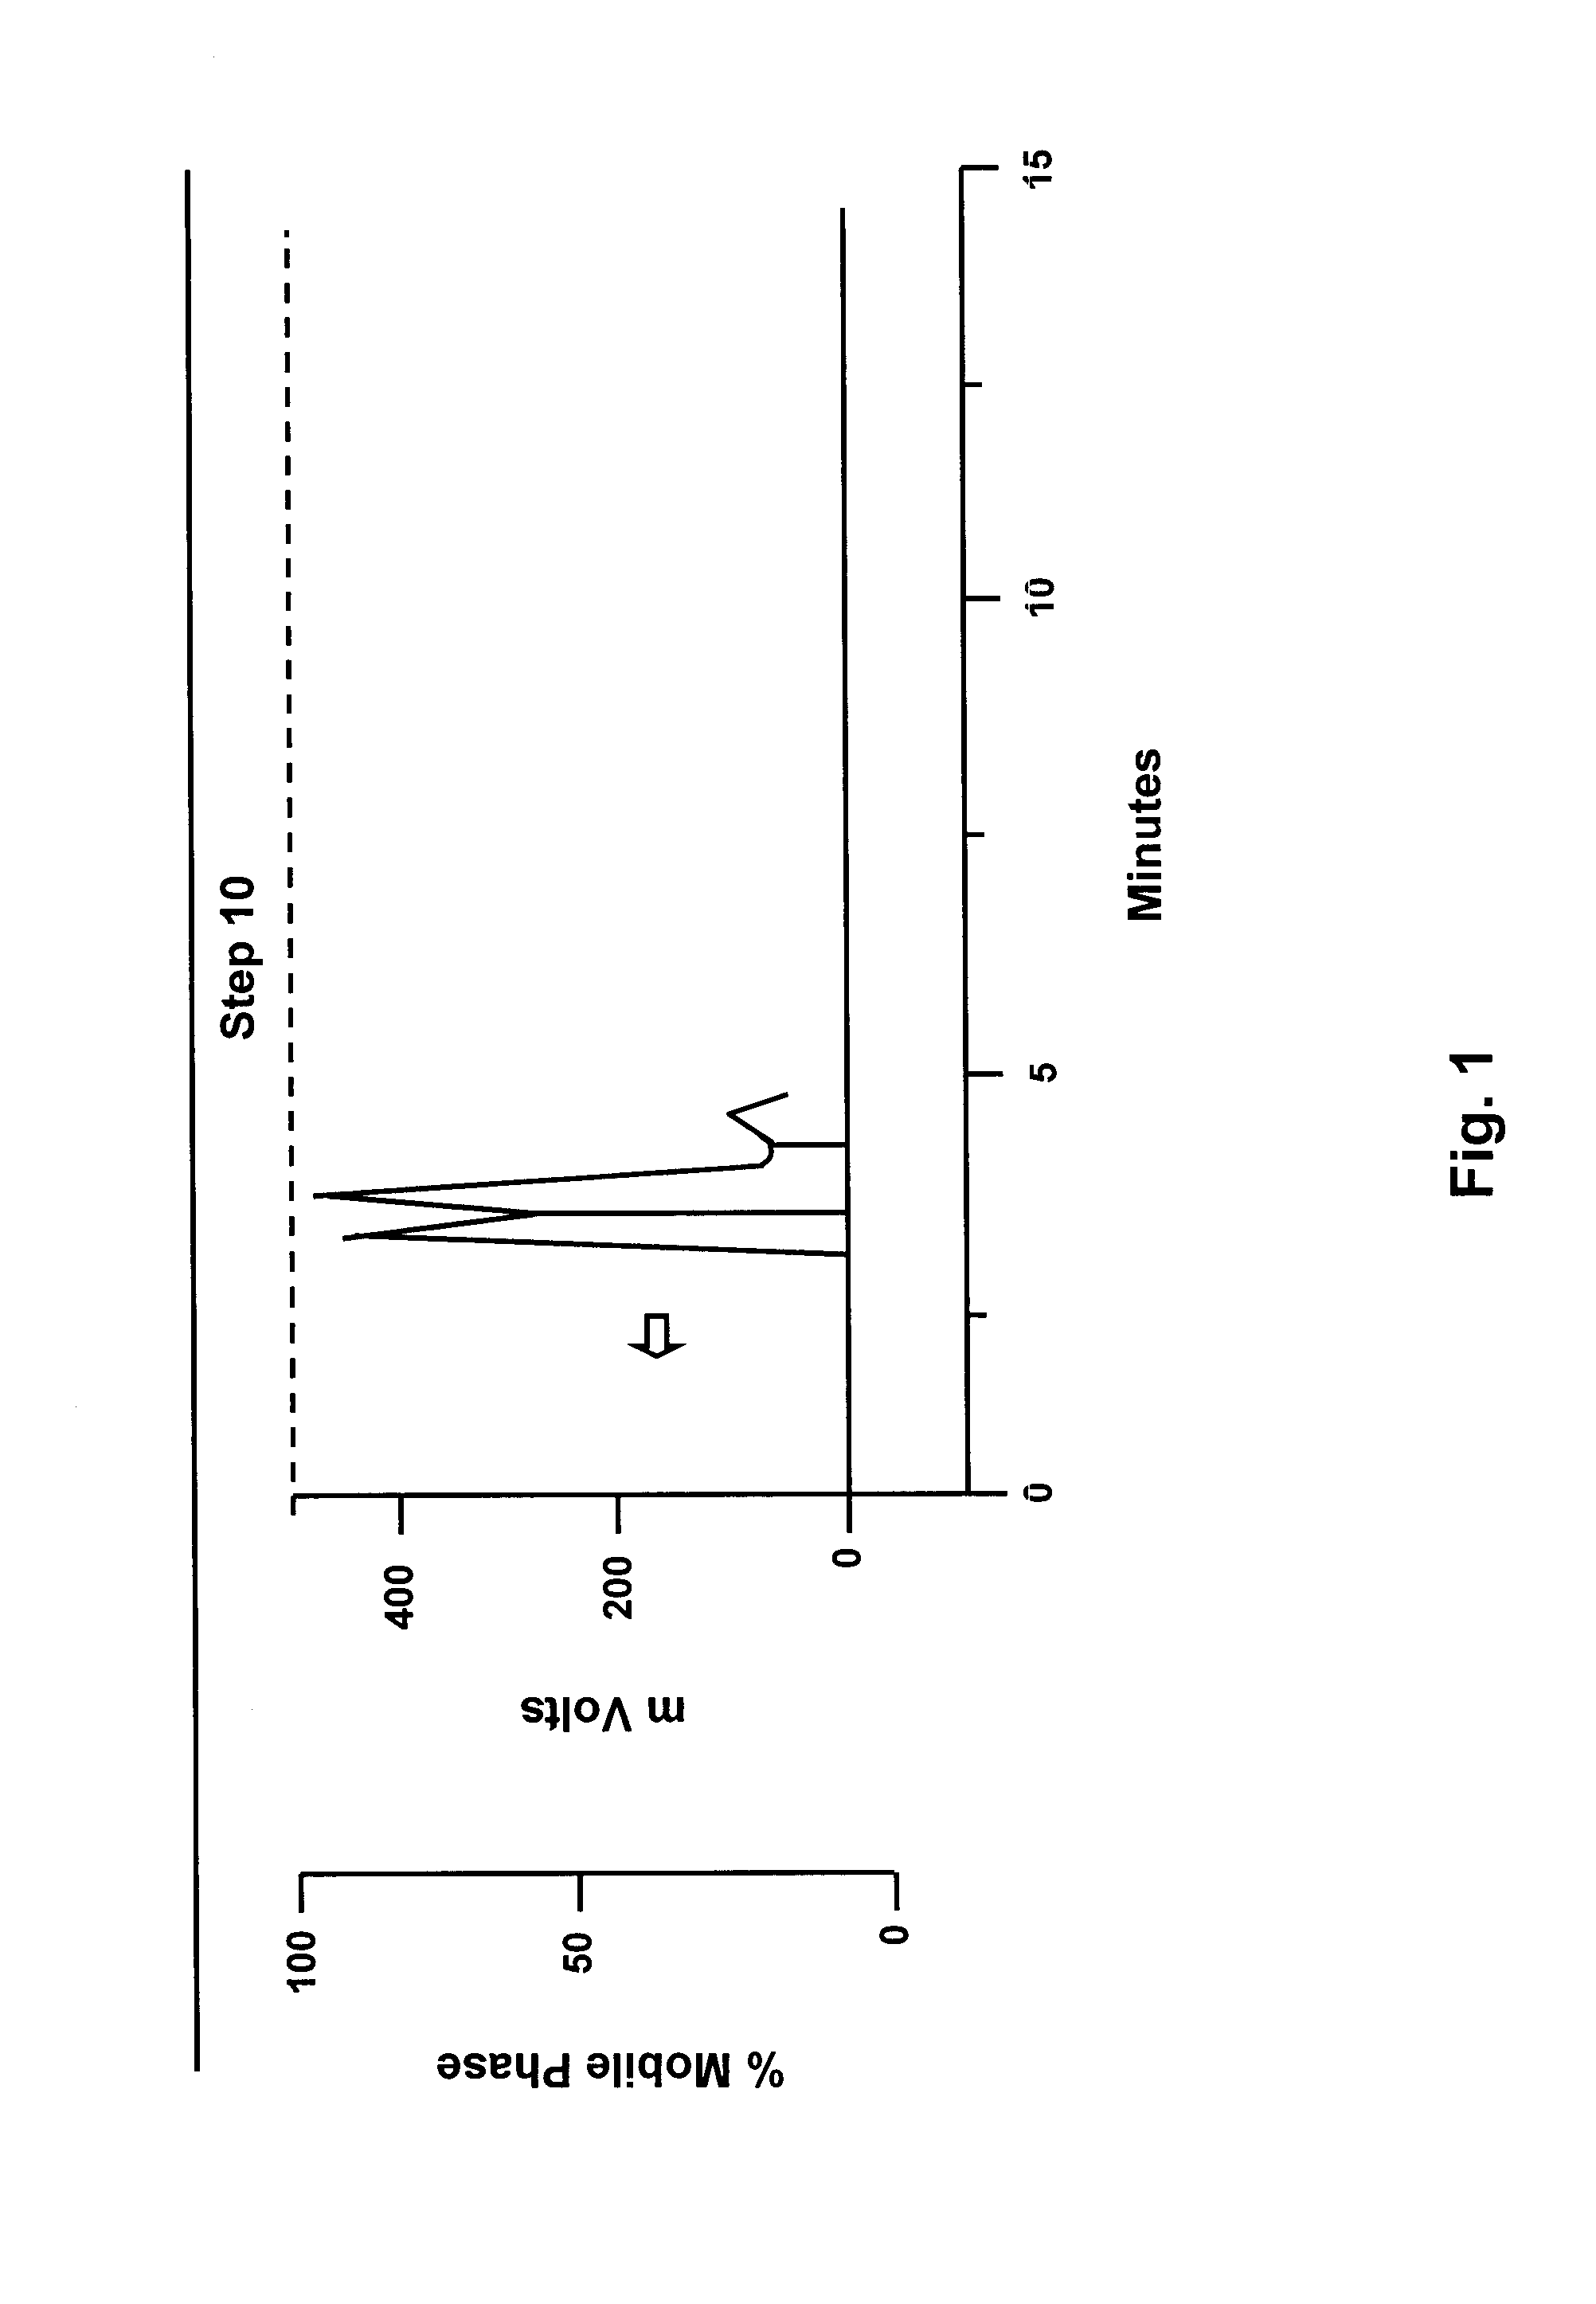 Method for preparation of nicotinic acid copper chloride complex, and its pharmaceutical uses